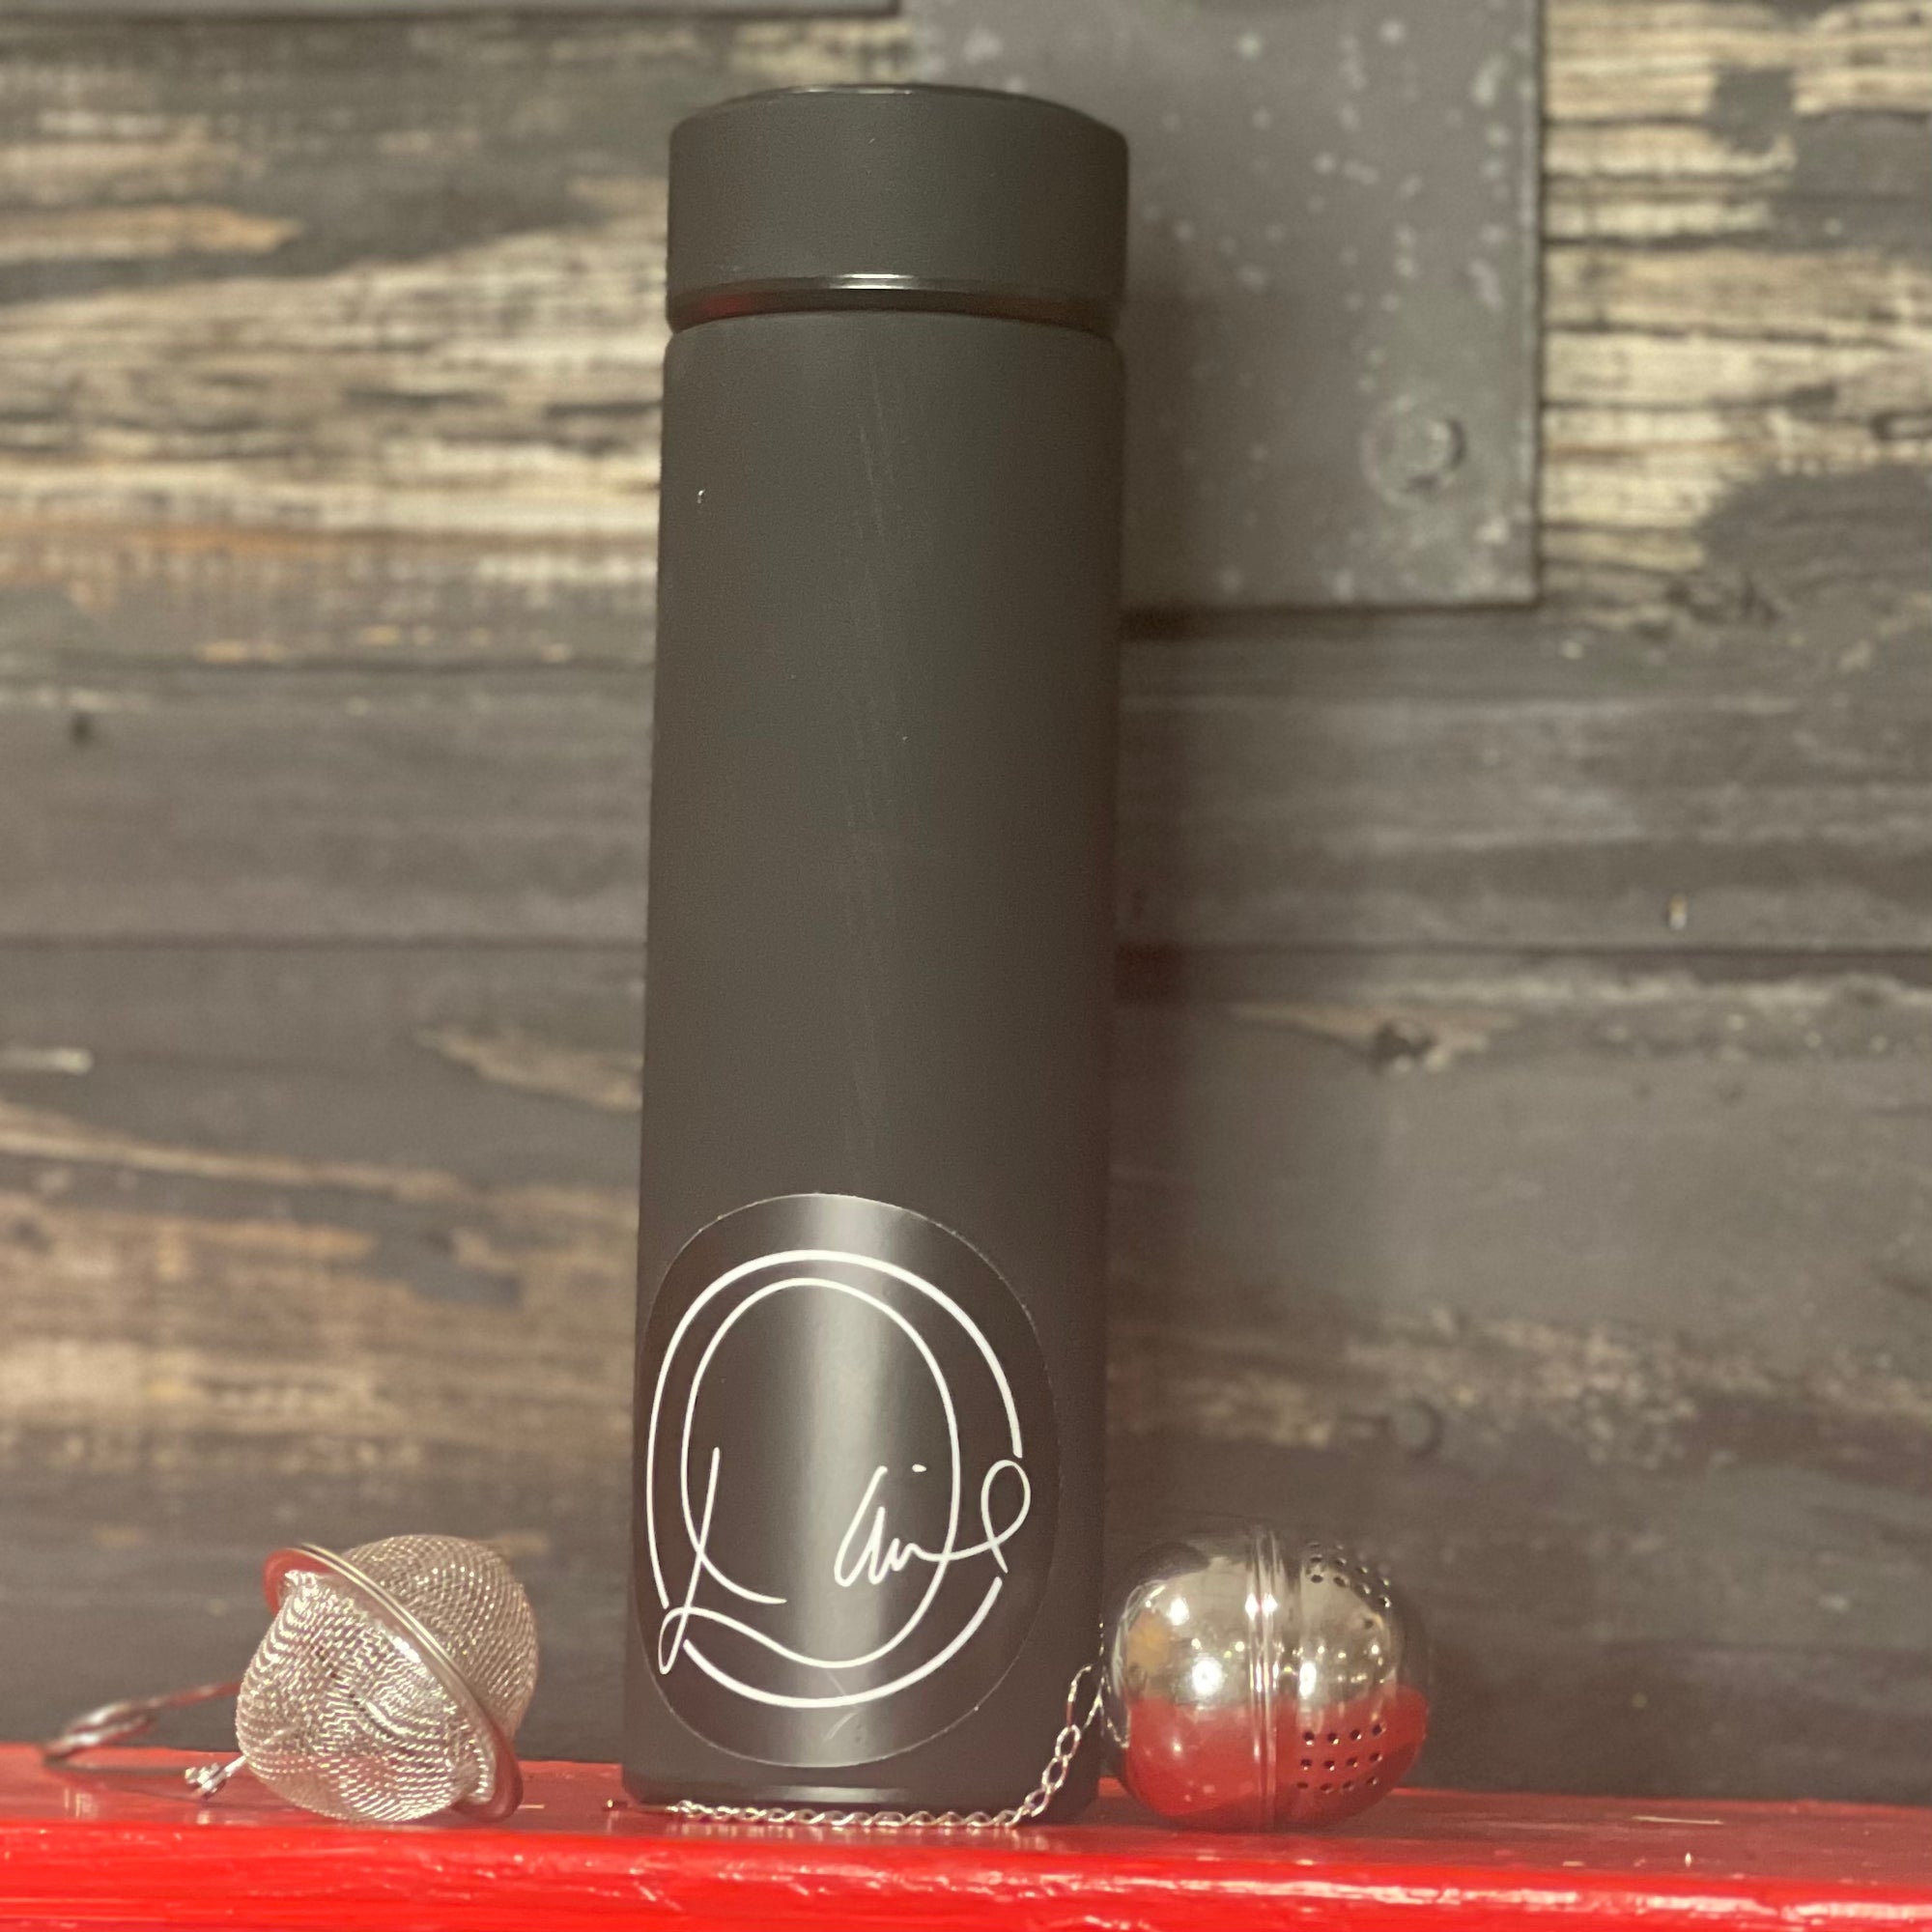 Signature Line Insulated Tea Tumbler with Infuser